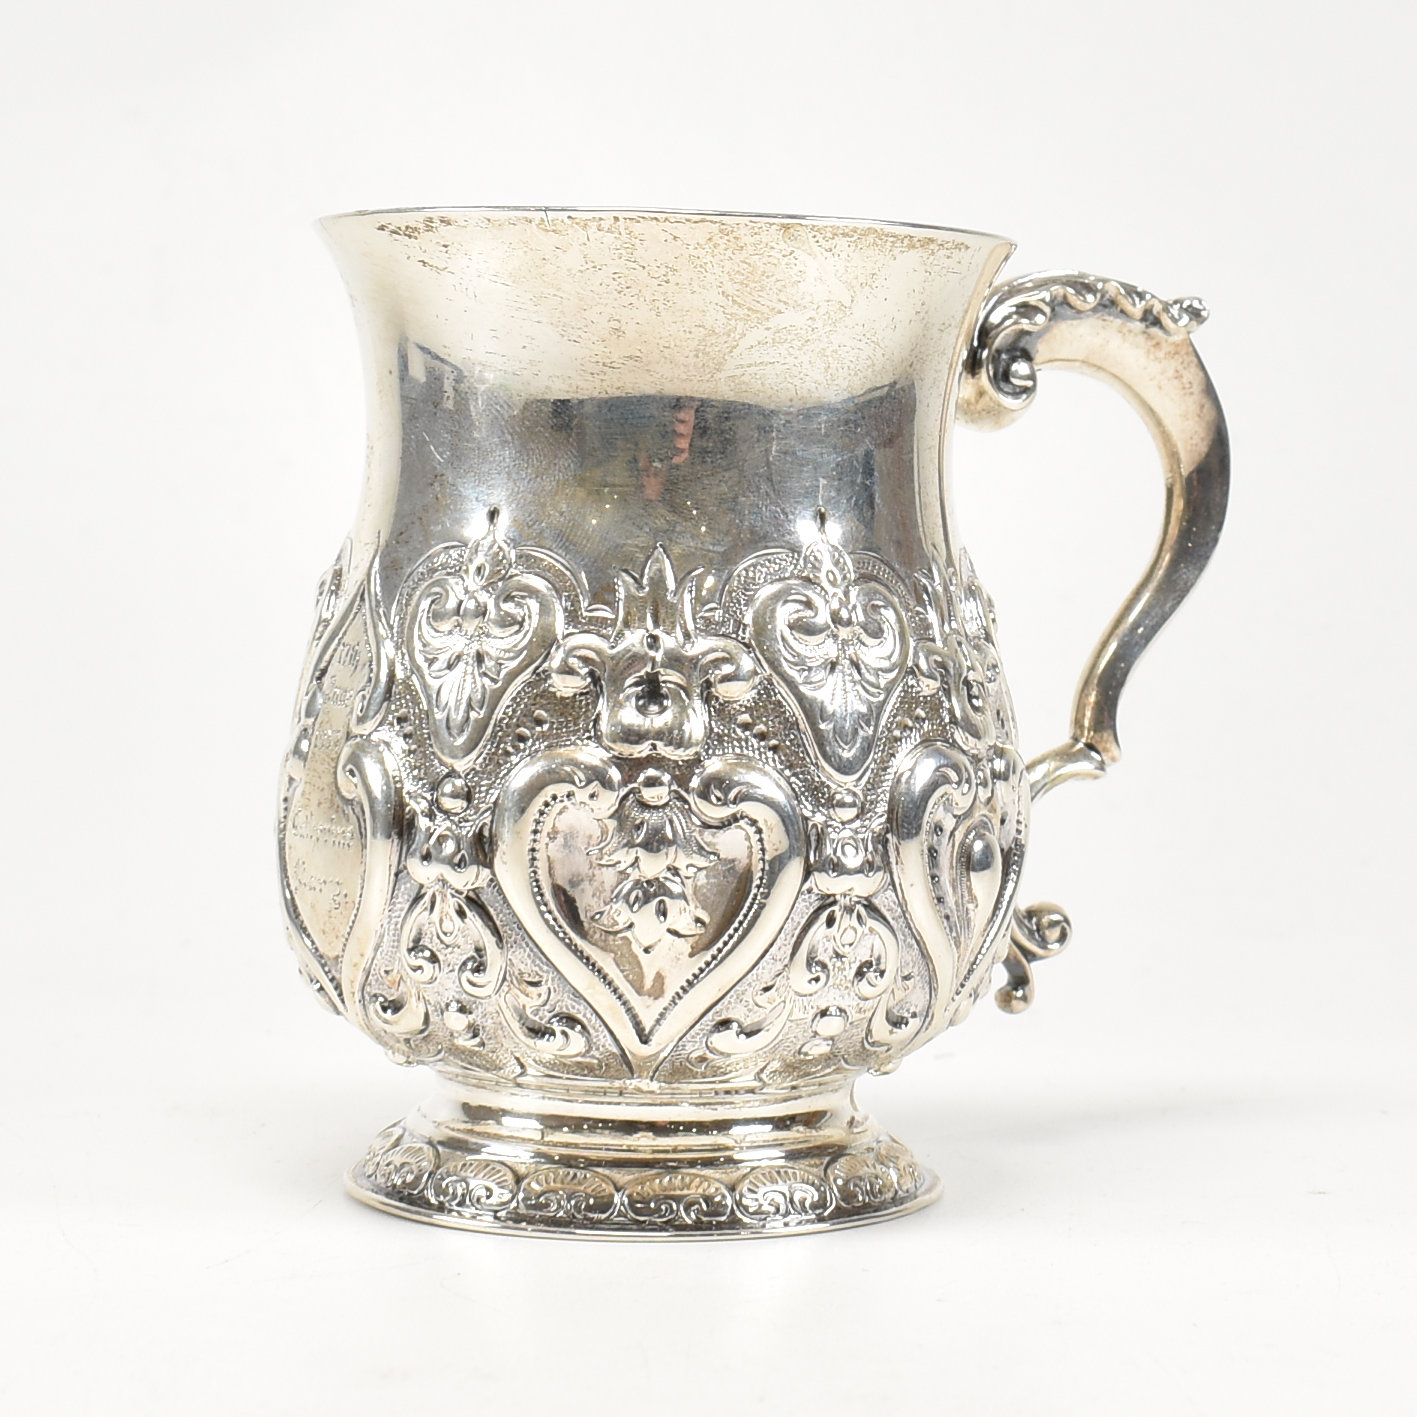 VICTORIAN HALLMARKED SILVER CHRISTENING CUP - Image 8 of 9